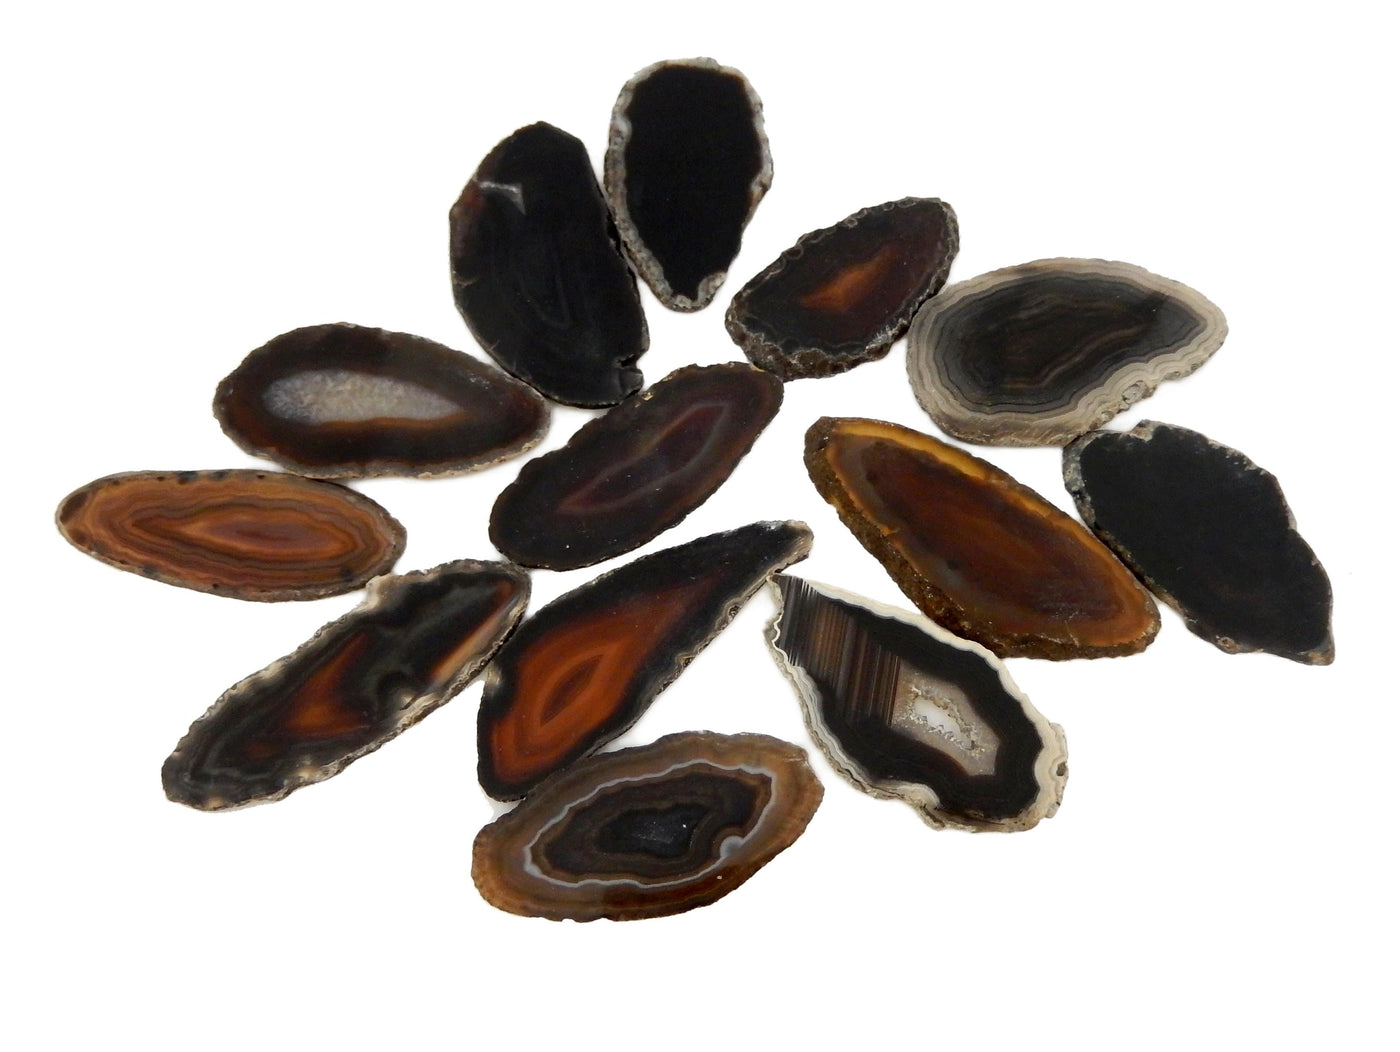 Variety sets of black agate slices spread out on white background